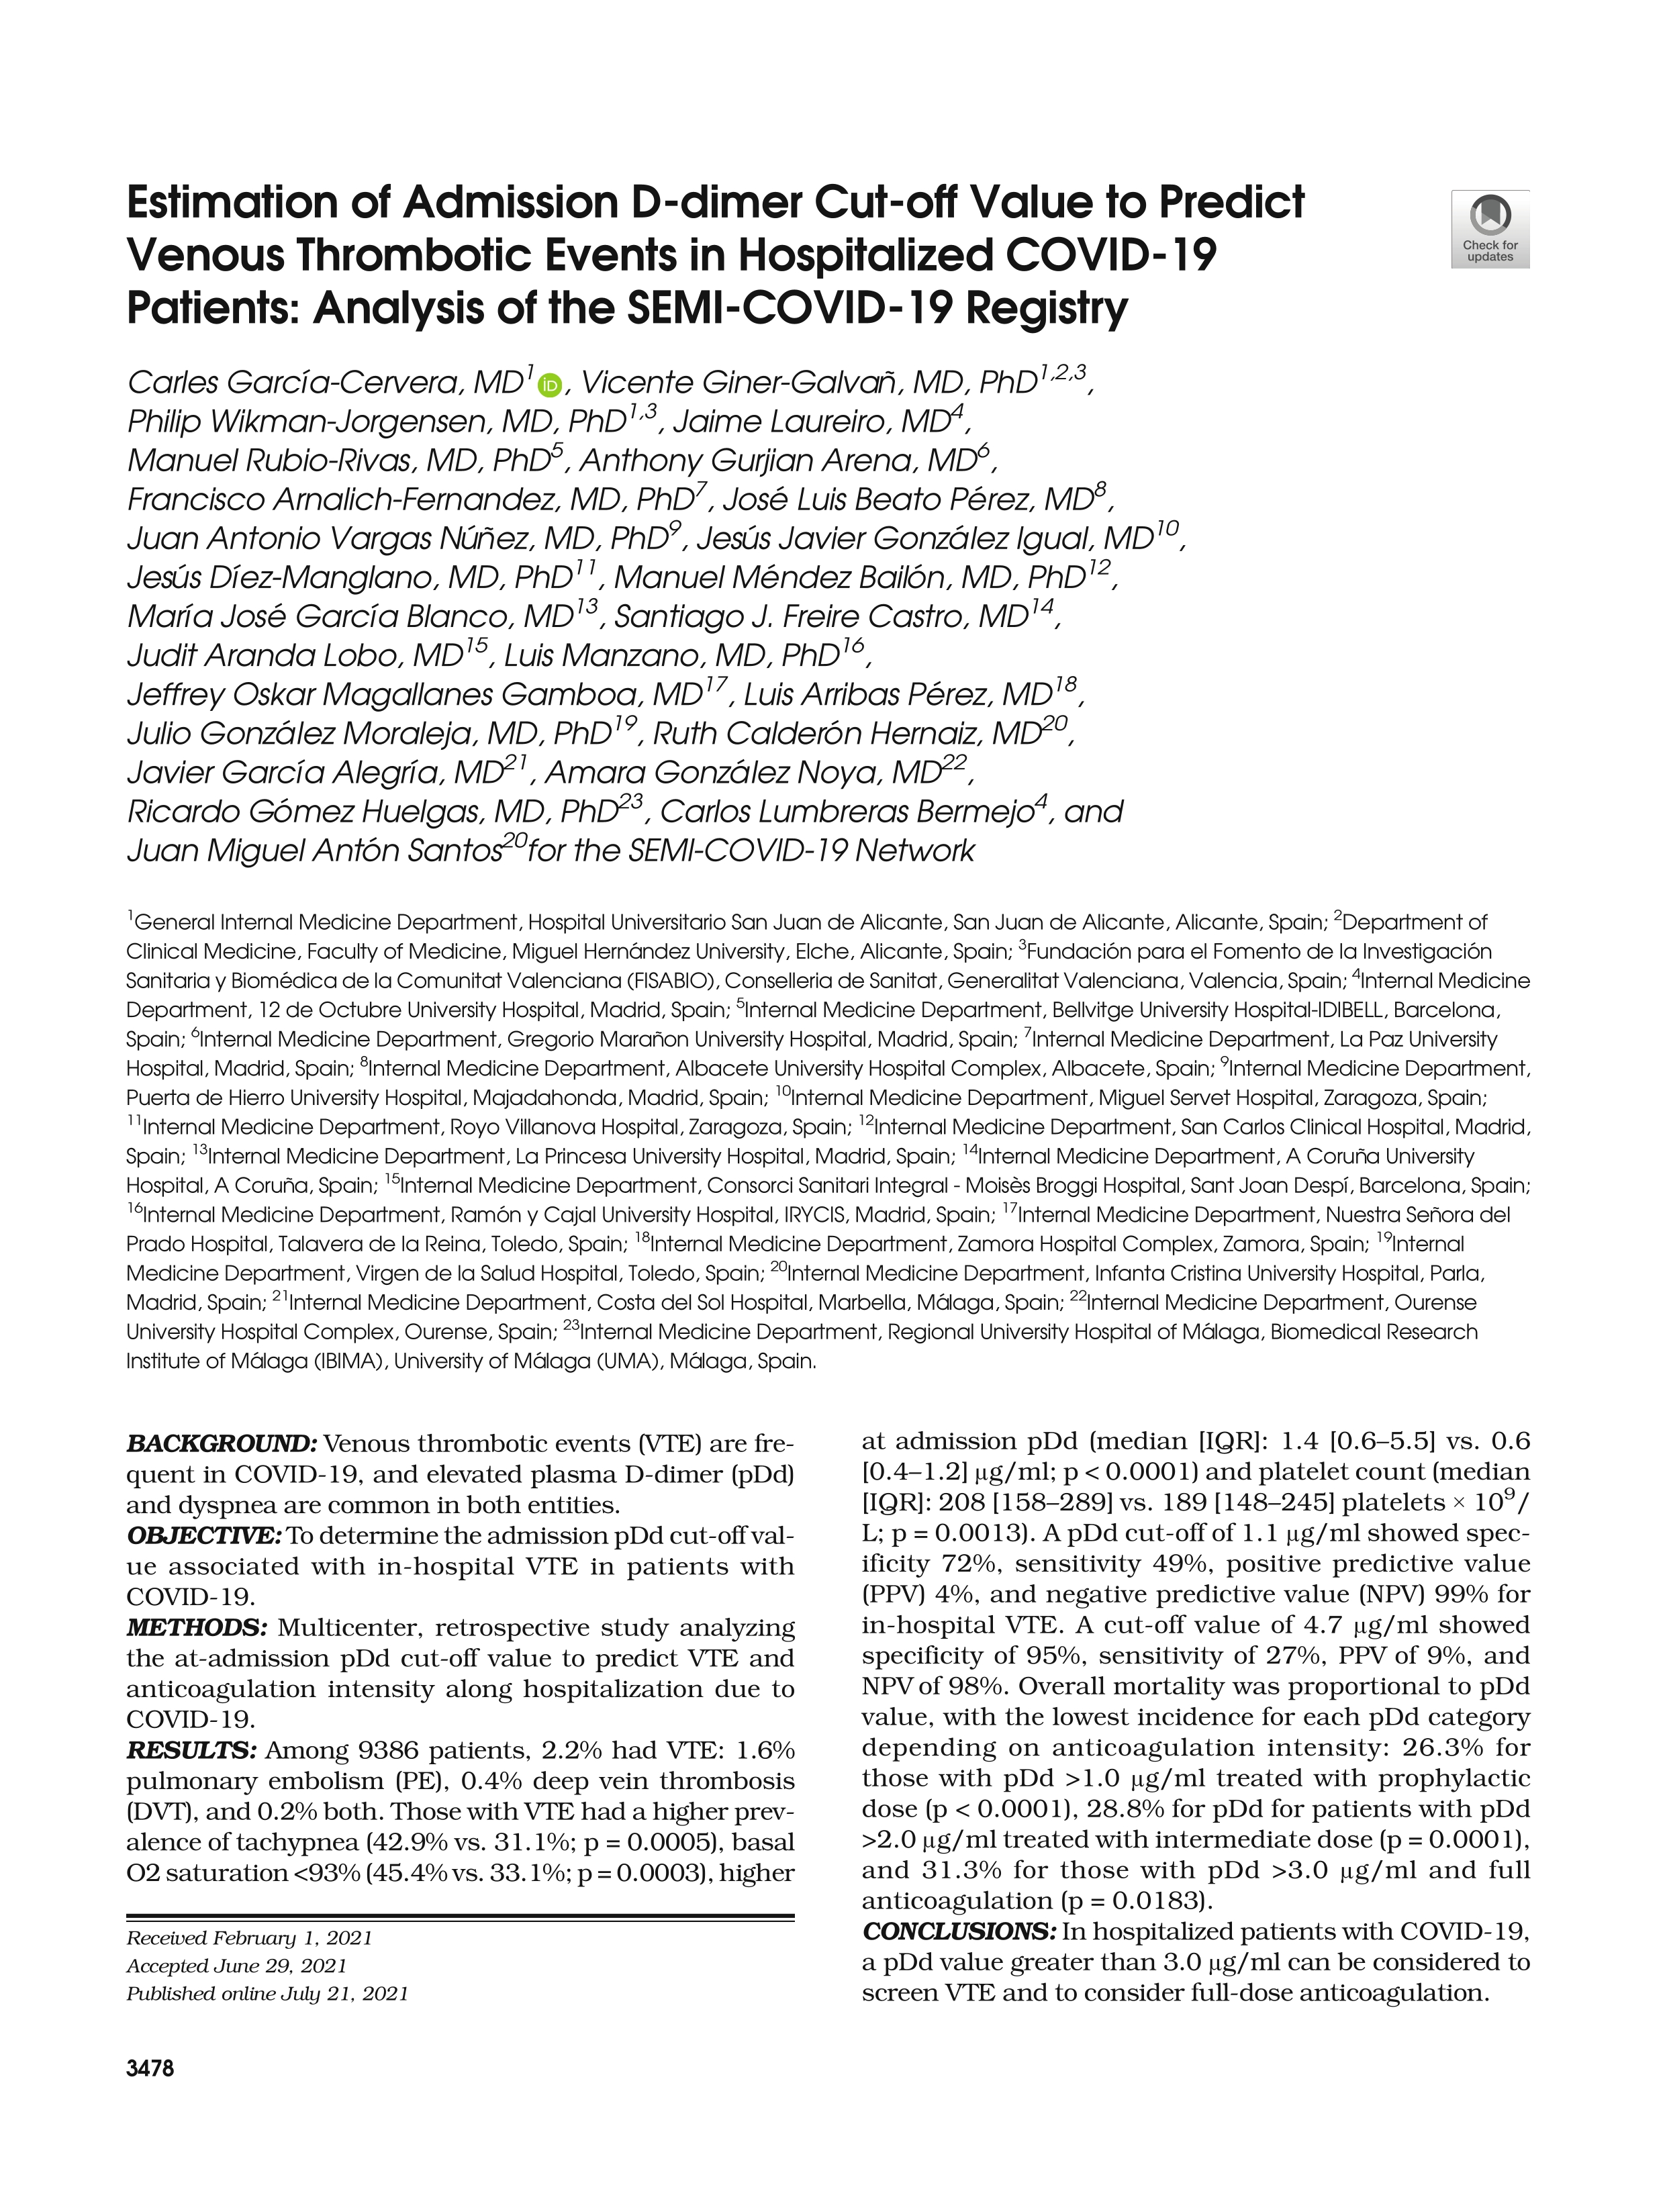 Estimation of Admission D-dimer Cut-off Value to Predict Venous Thrombotic Events in Hospitalized COVID-19 Patients: Analysis of the SEMI-COVID-19 Registry